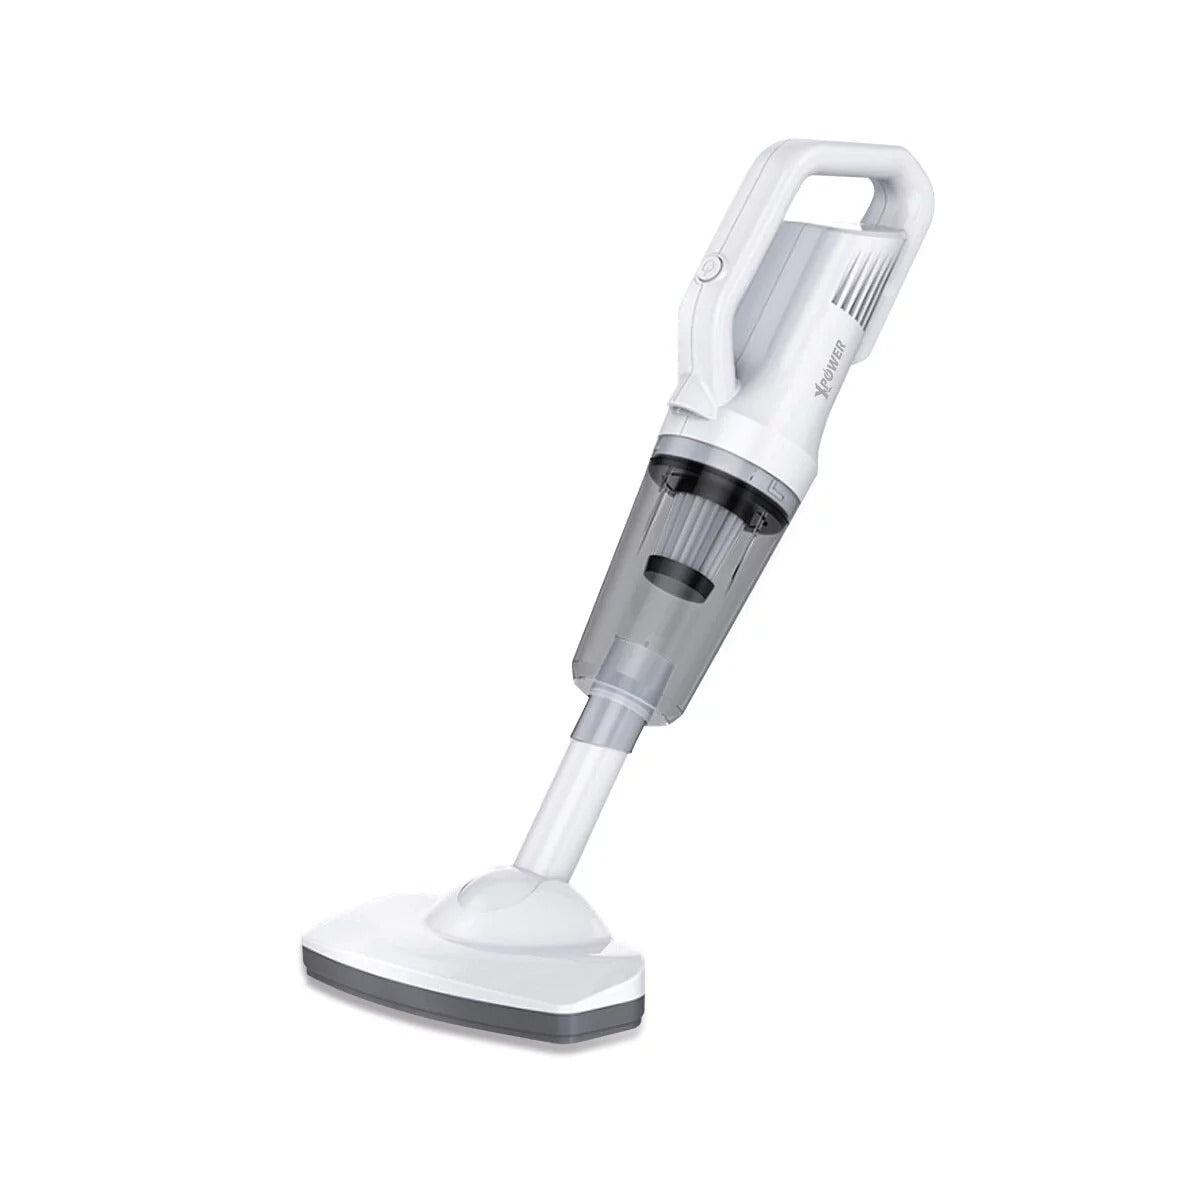 XPower VC4 4In1 Cordless Vacuum Cleaner 6000mAh Battery - White